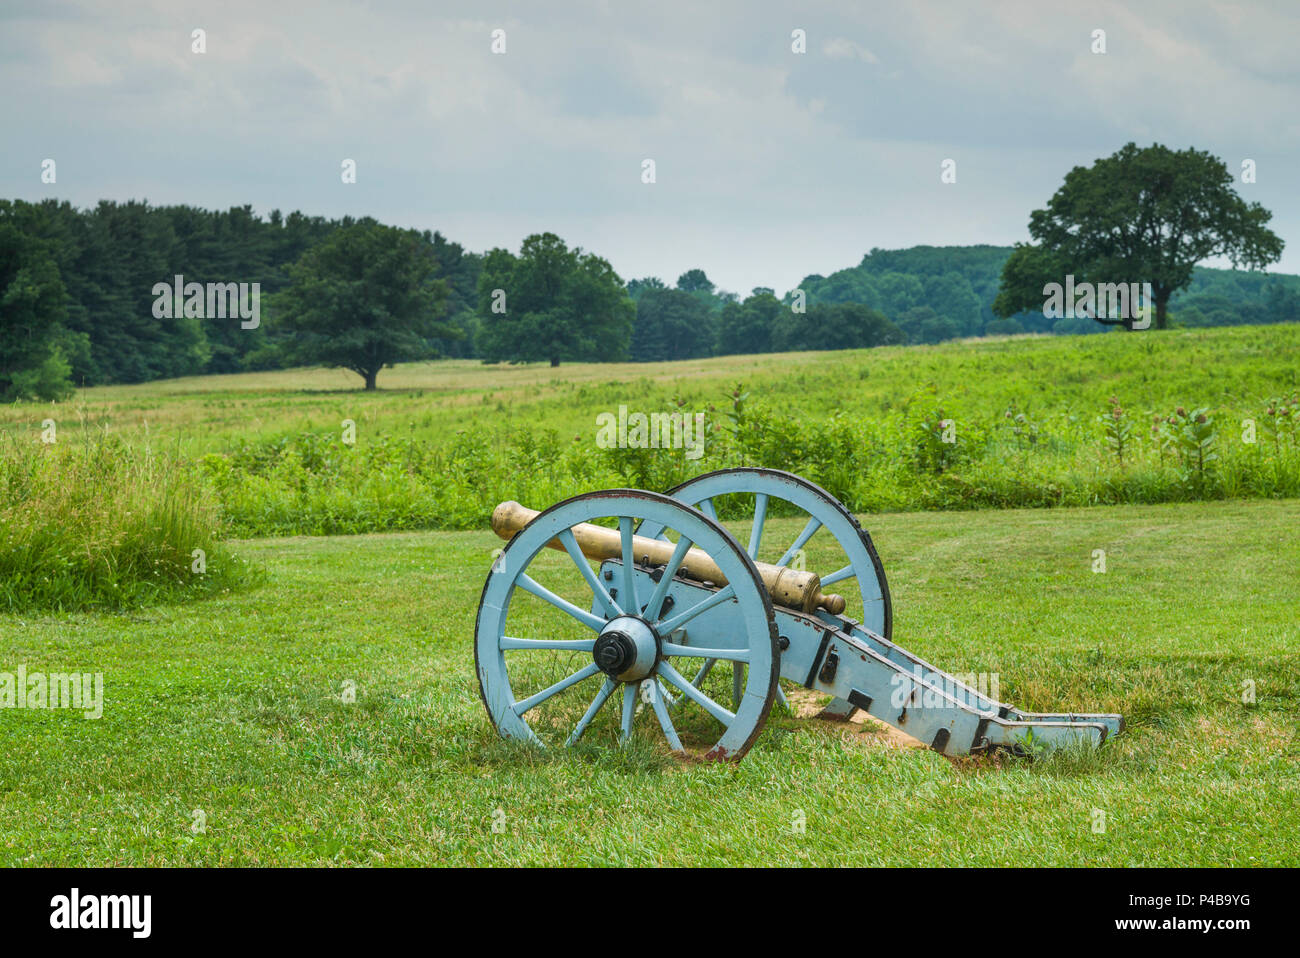 USA, Pennsylvania, King of Prussia, Valley Forge National Historical Park, Battlefield of the American Revolutionary War, Muhlenberg Brigade cannon Stock Photo